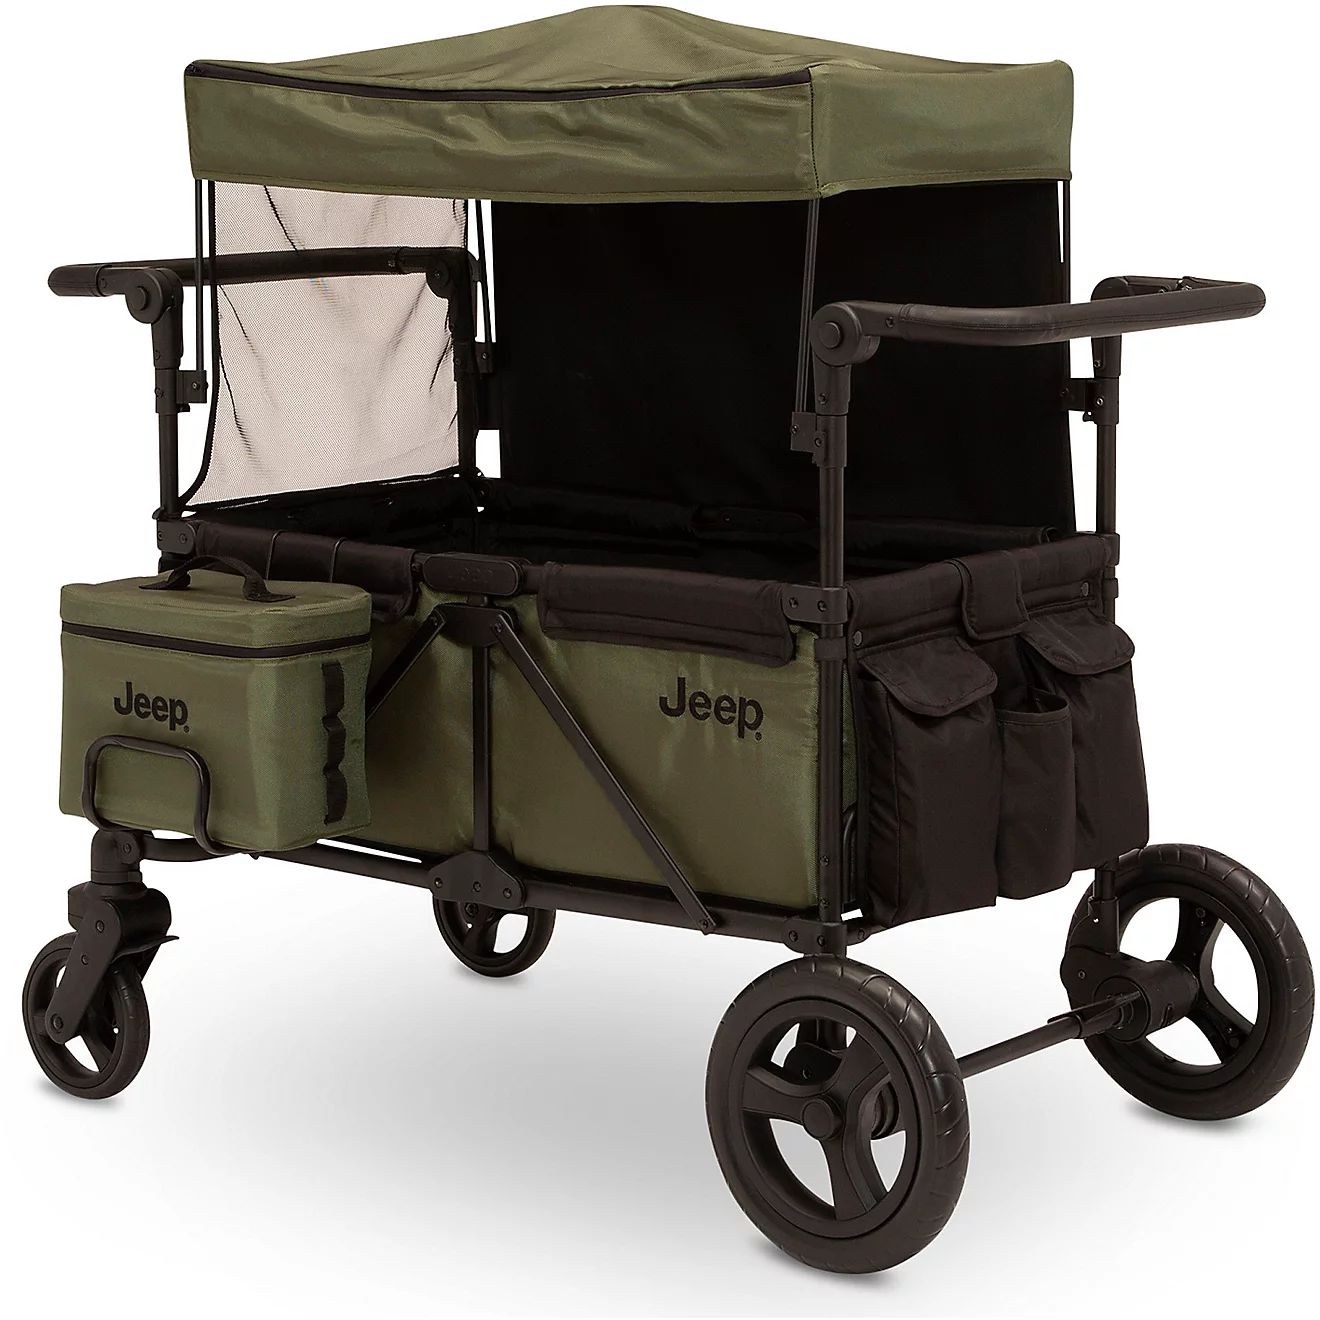 Delta Jeep Wrangle Deluxe Wagon | Academy | Academy Sports + Outdoors